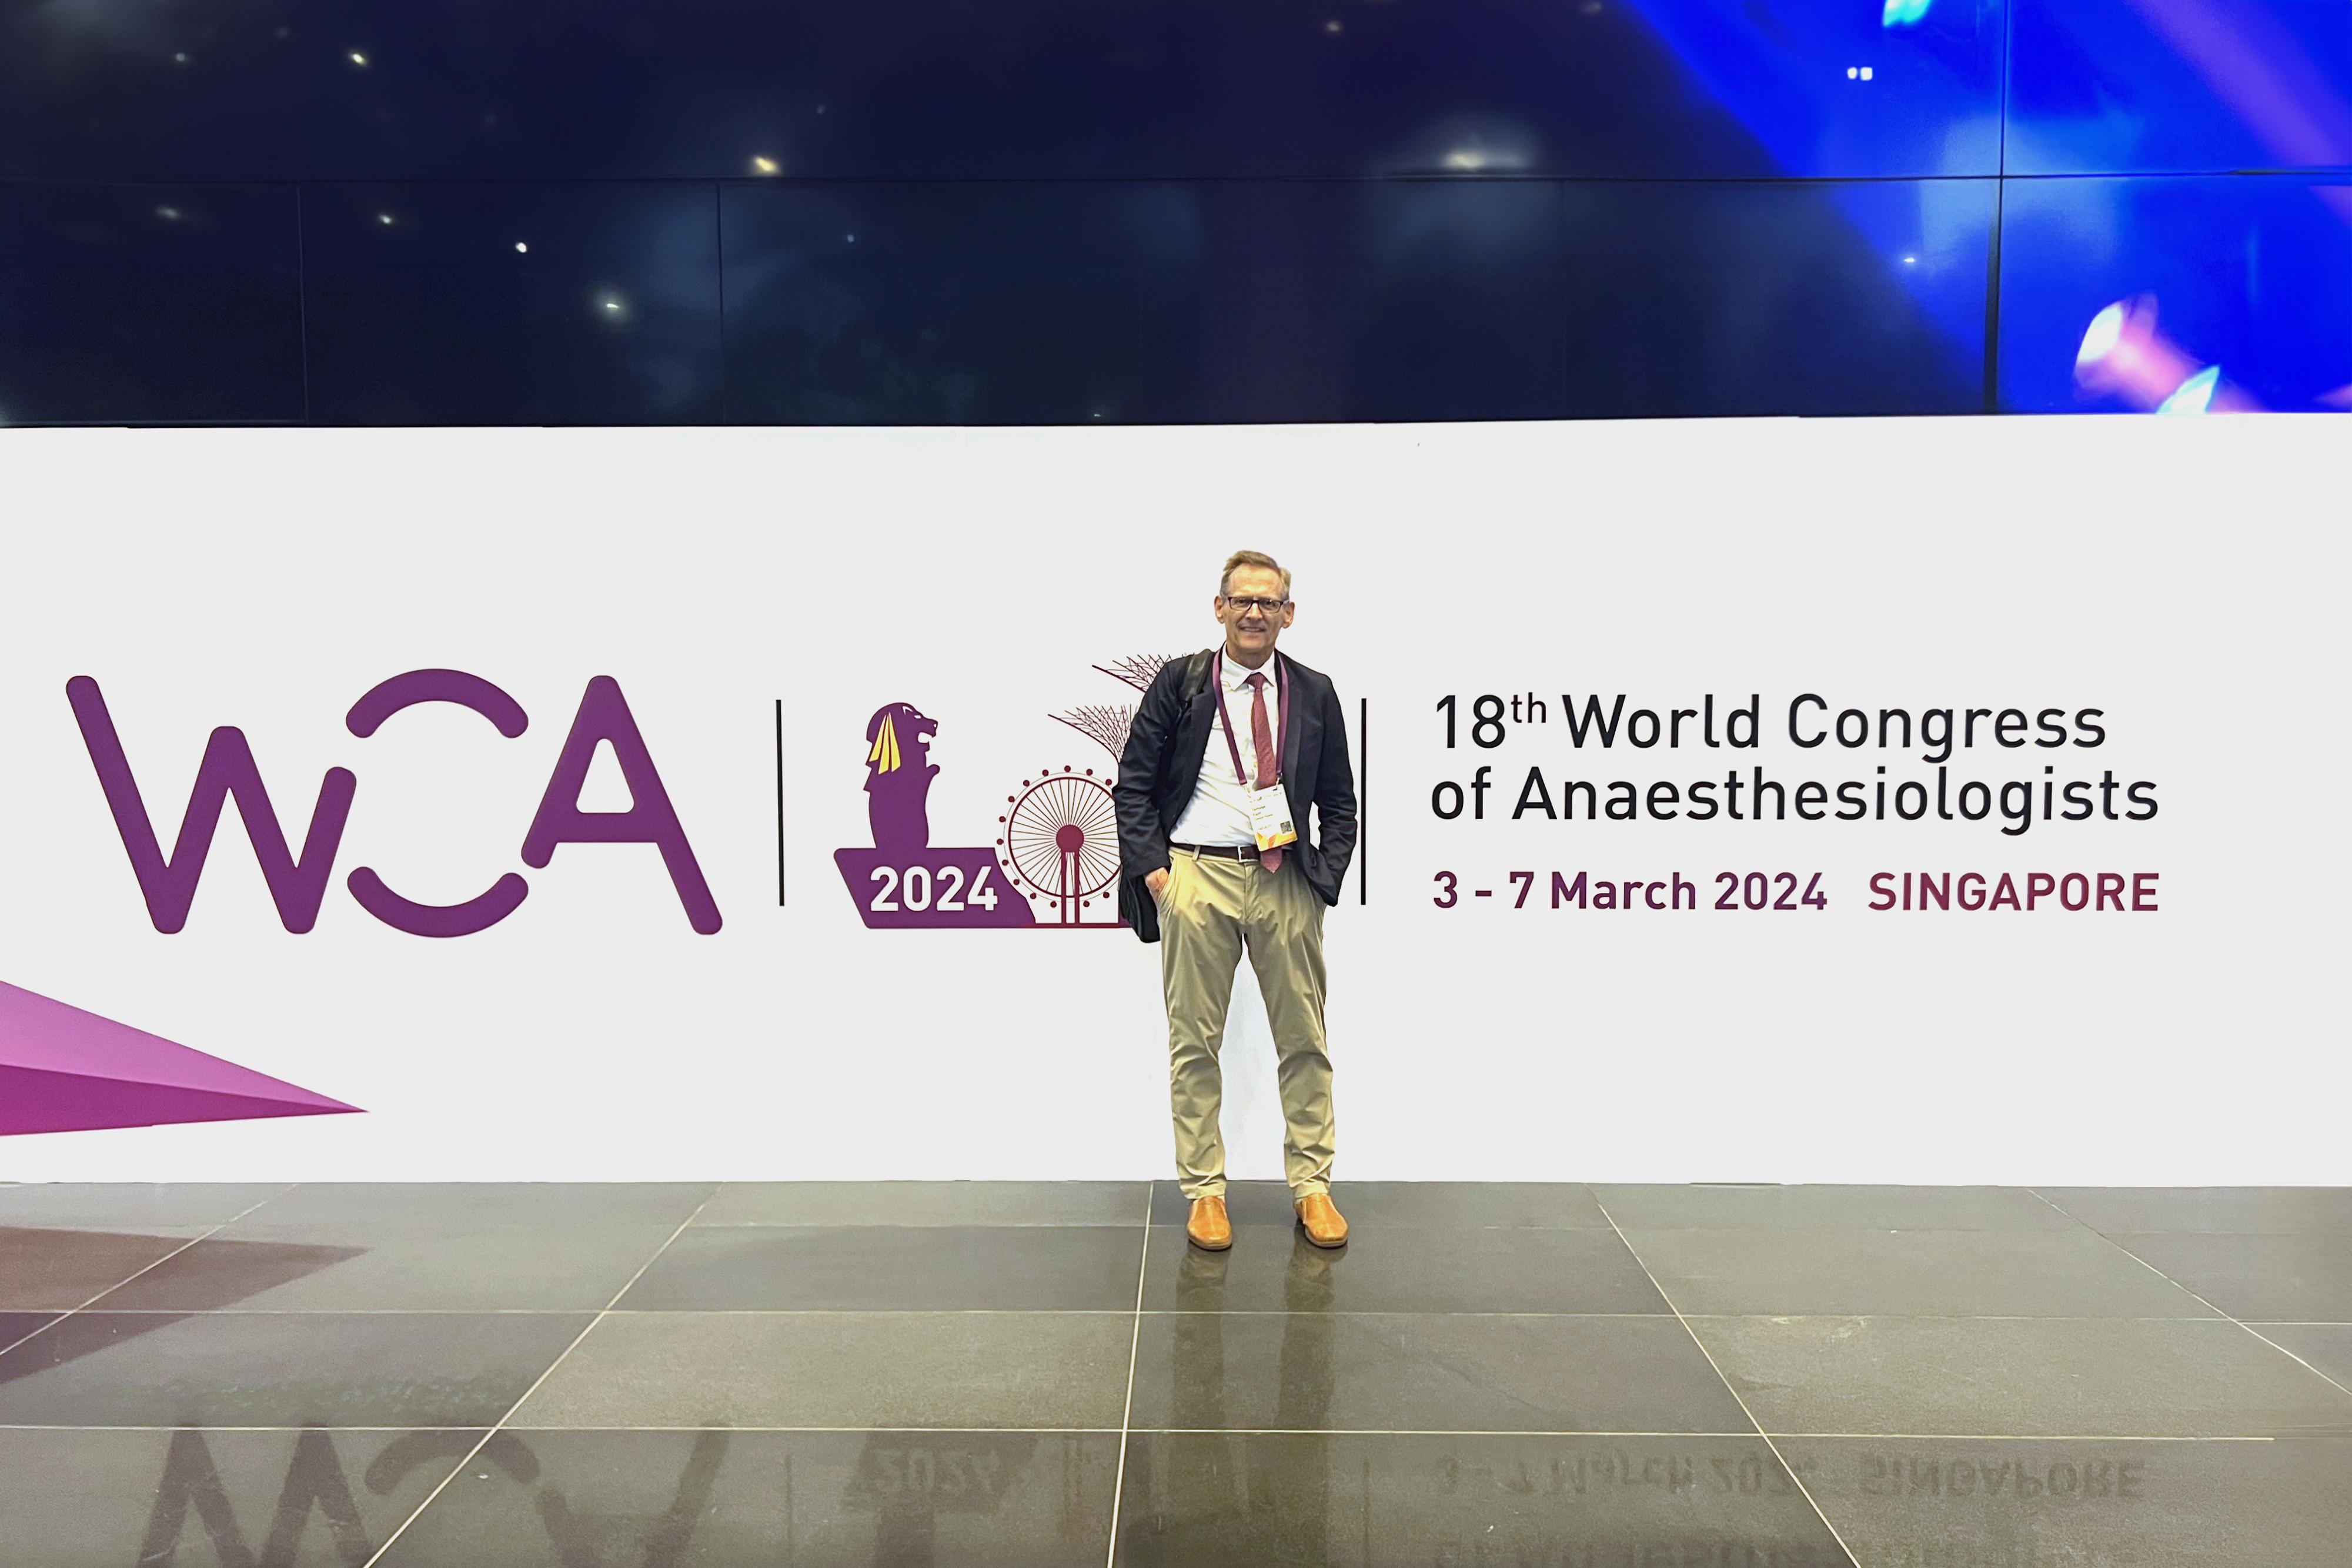 Dr. Egan in front of the 18th World Congress of Anesthesiologists sign in Singapore